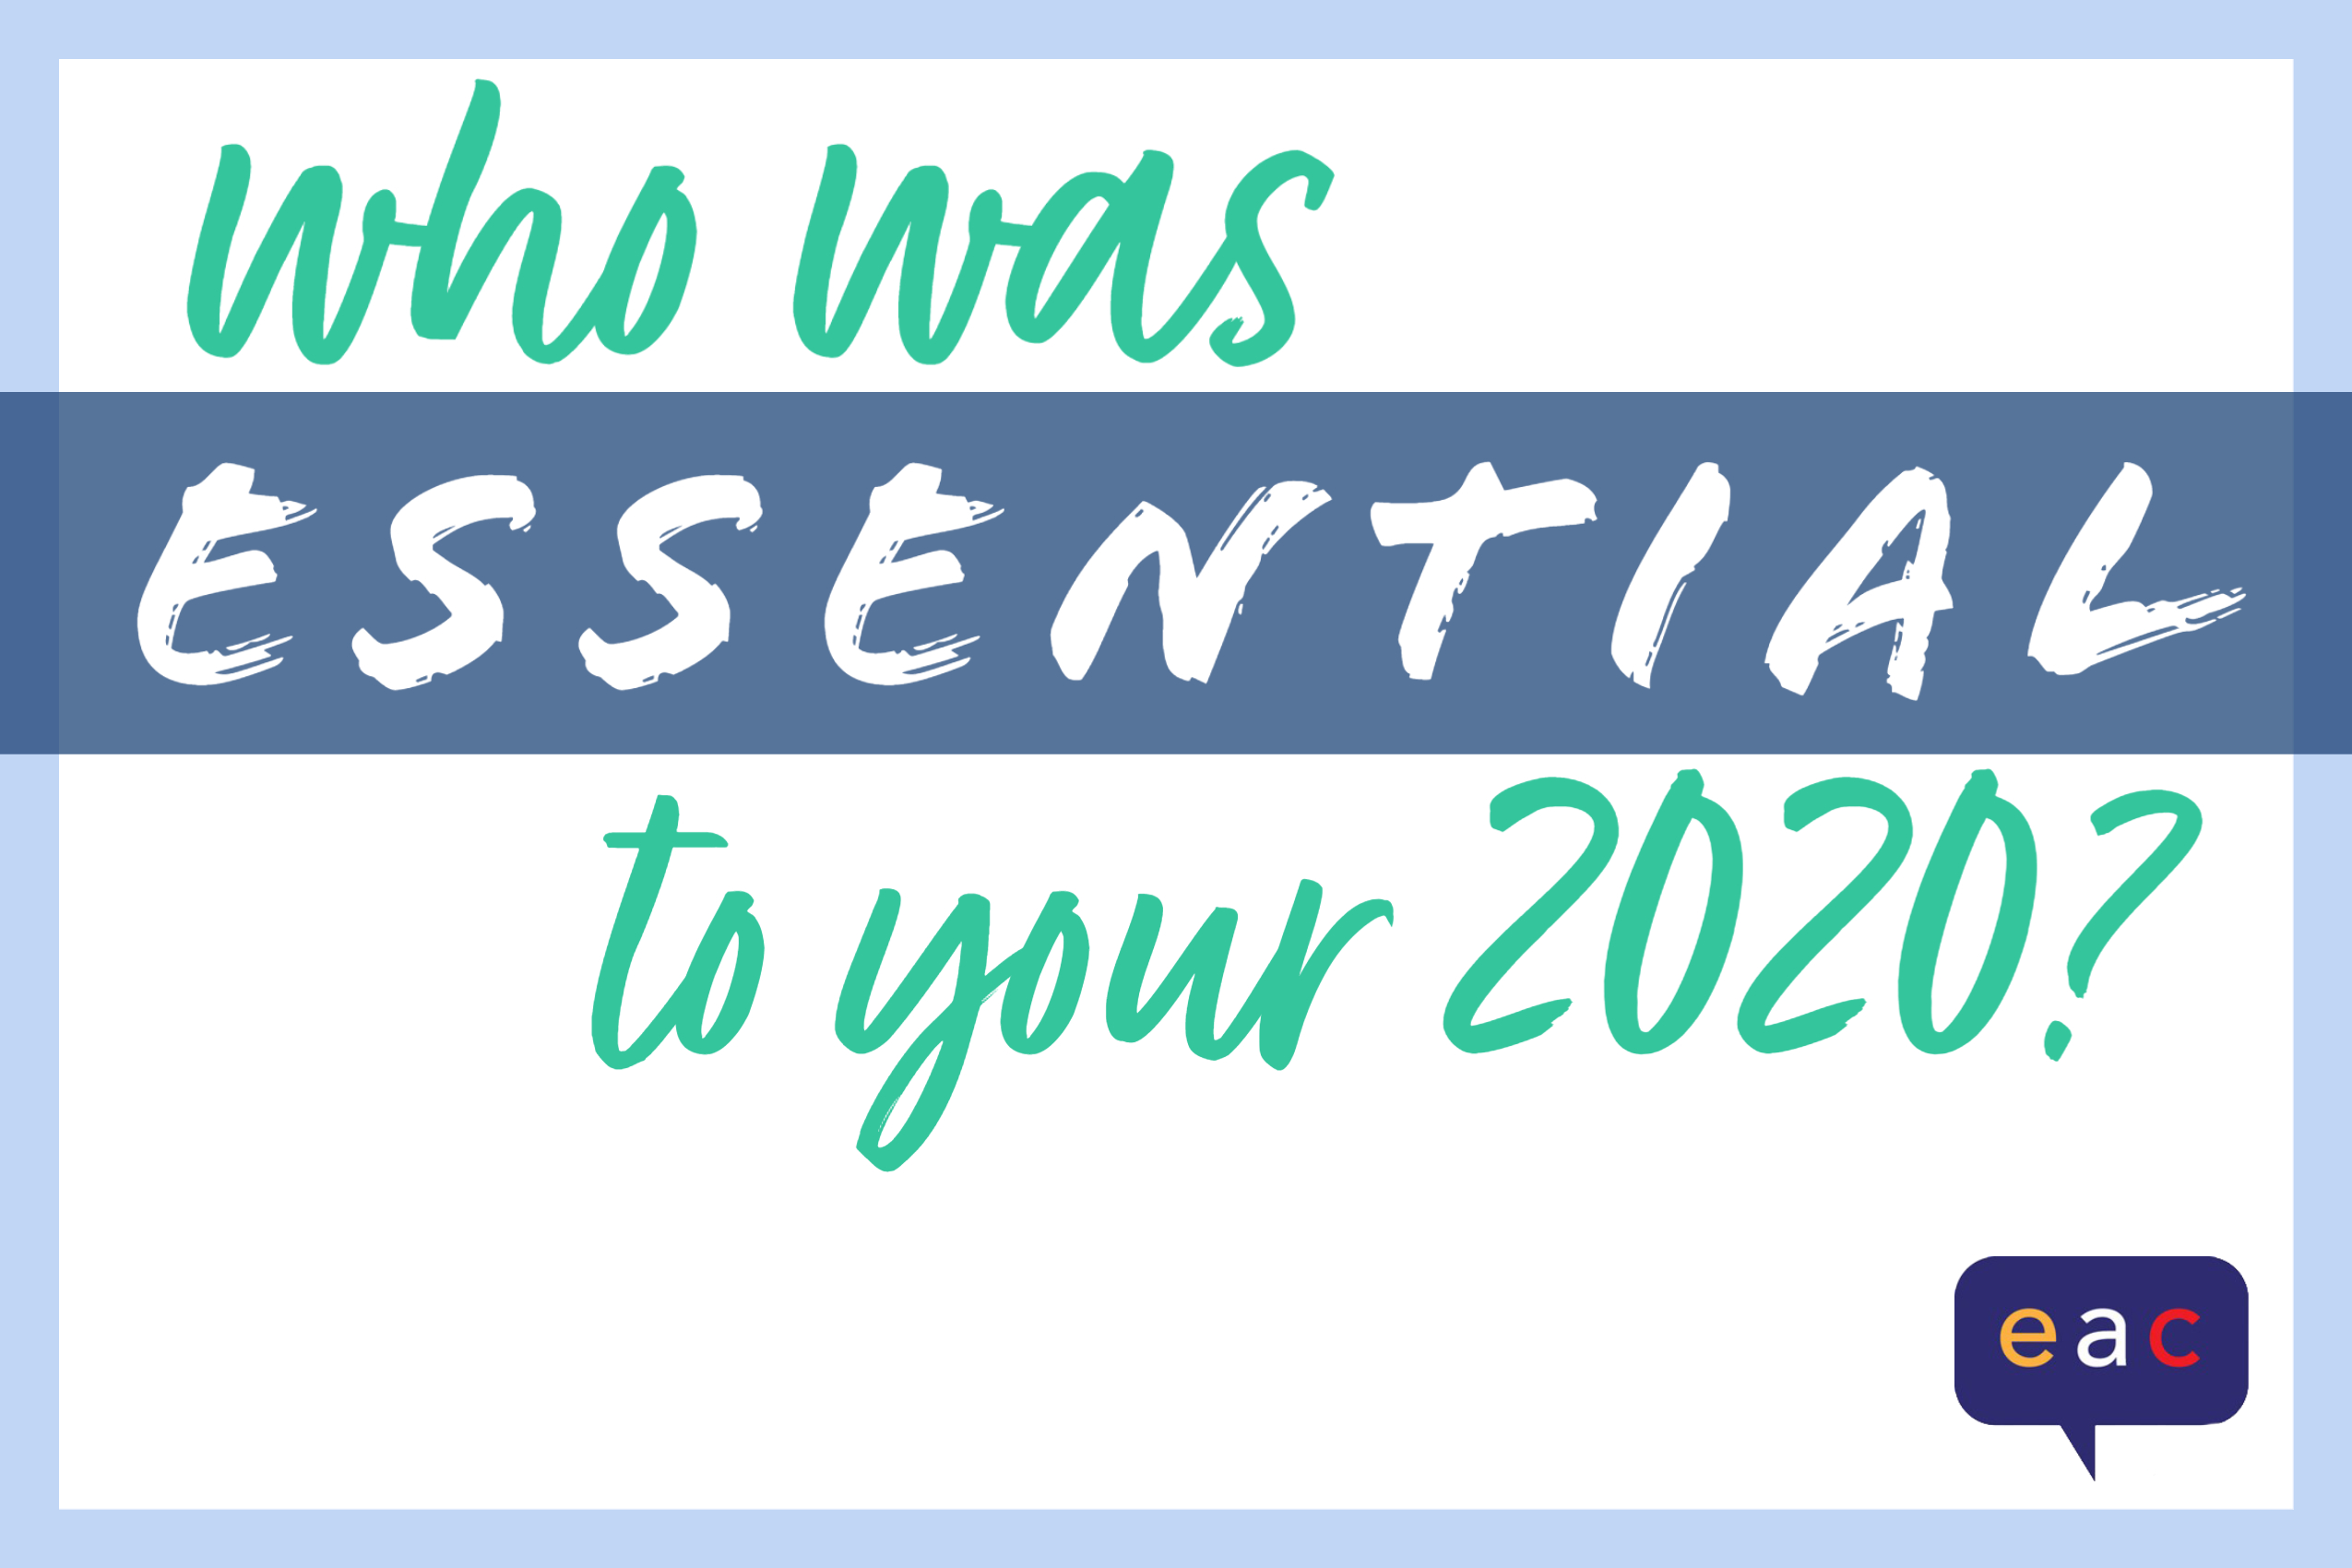 Who Was Essential to Your 2020?